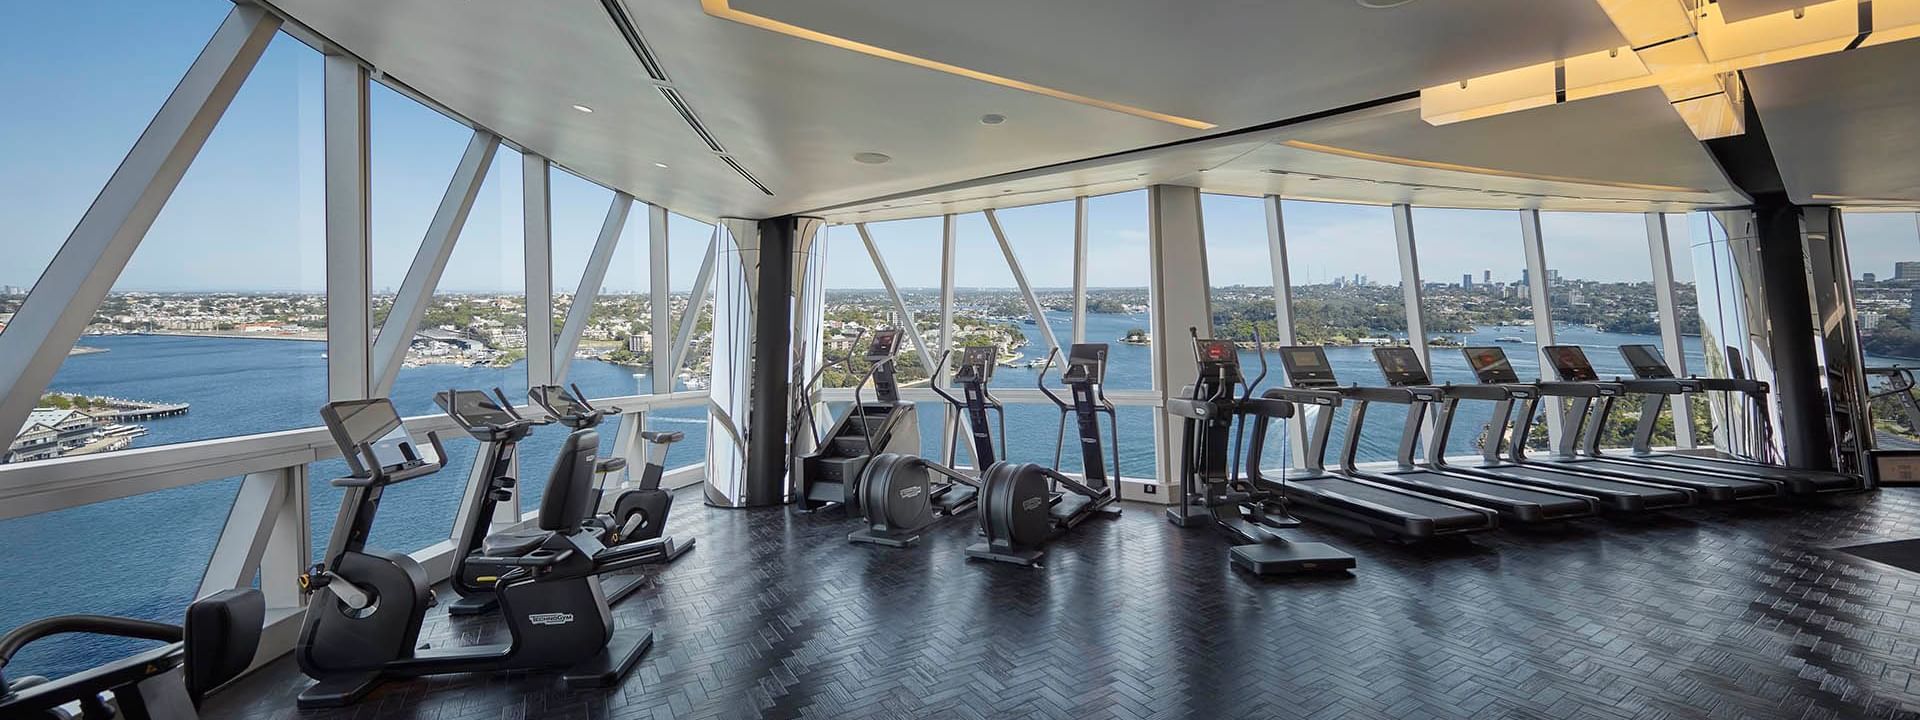 Fitness center with city view at Crown Towers Sydney